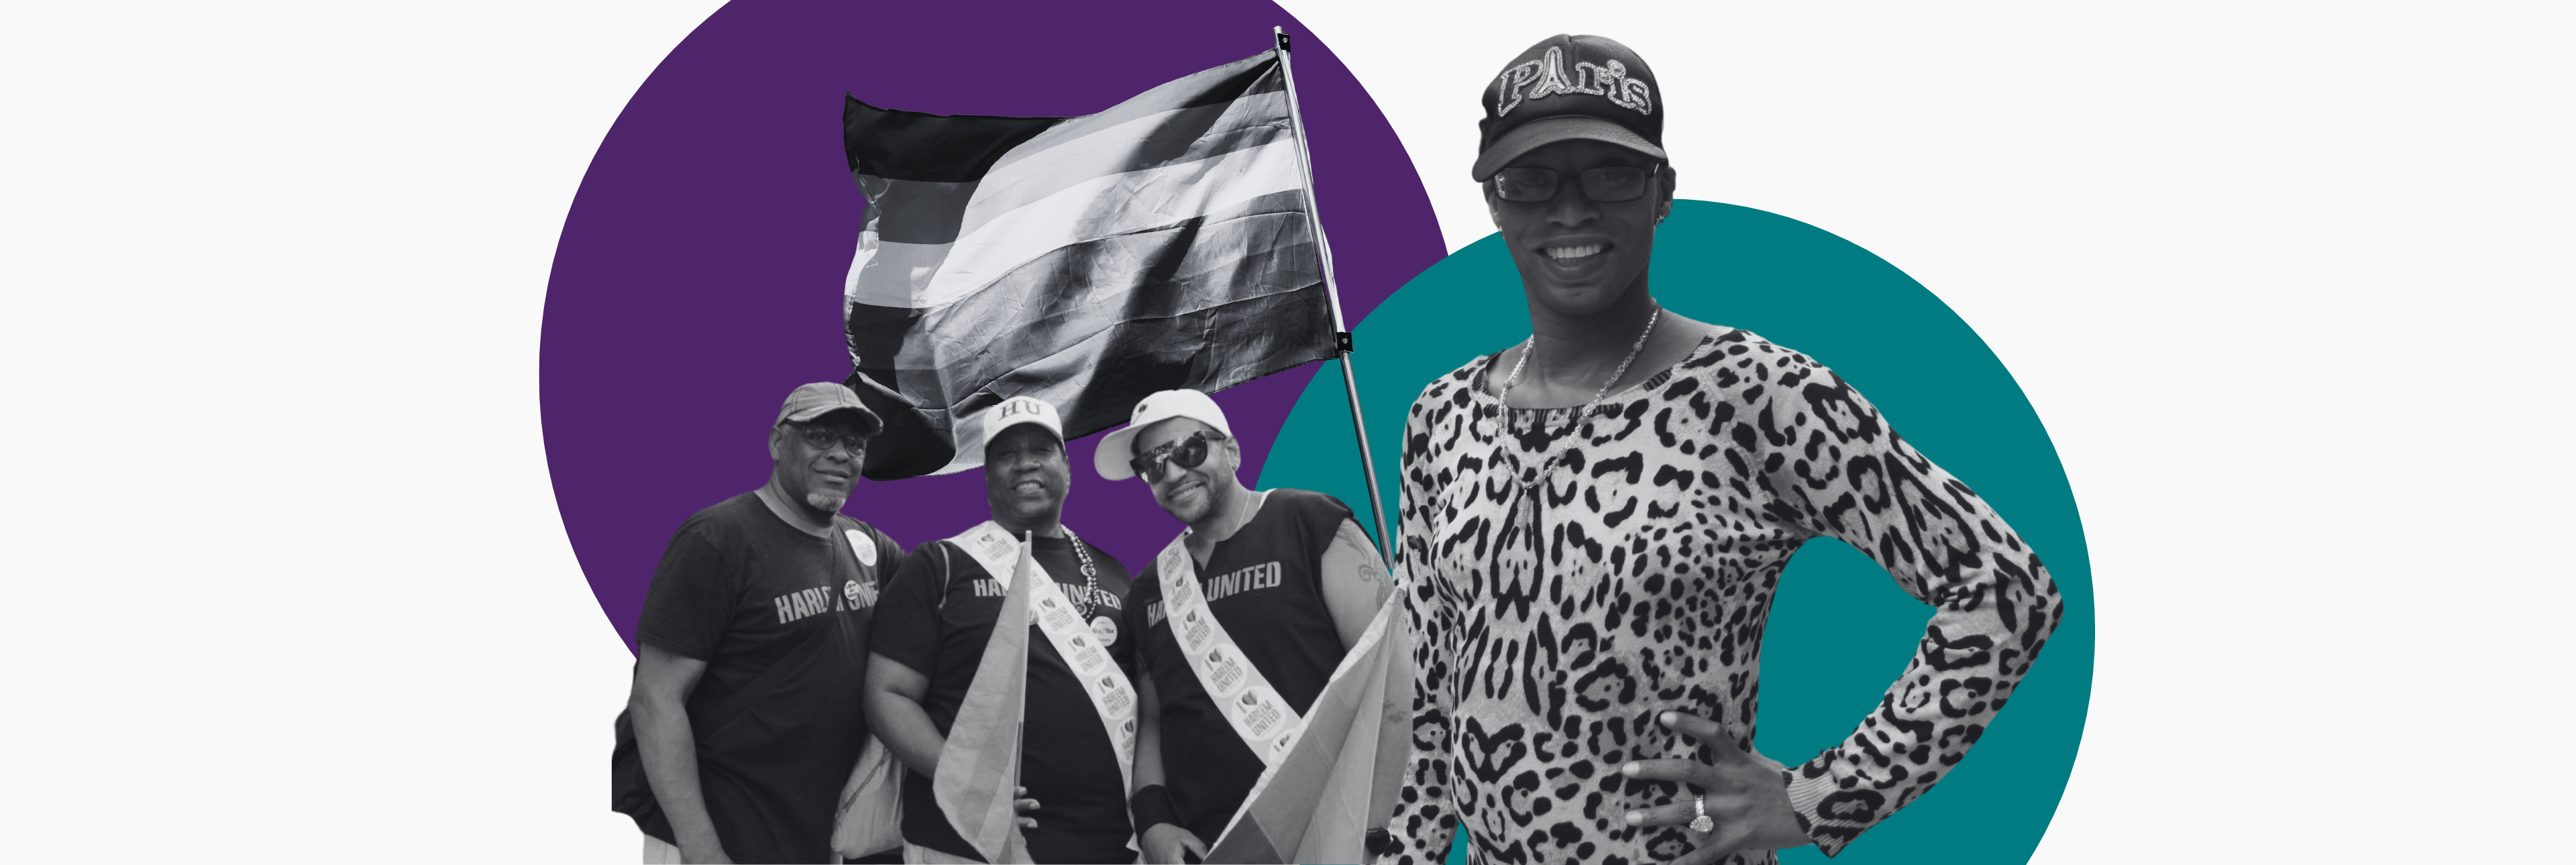 Collage featuring Shakira, Harlem United clients at the NYC Pride Parade, and a pride flag